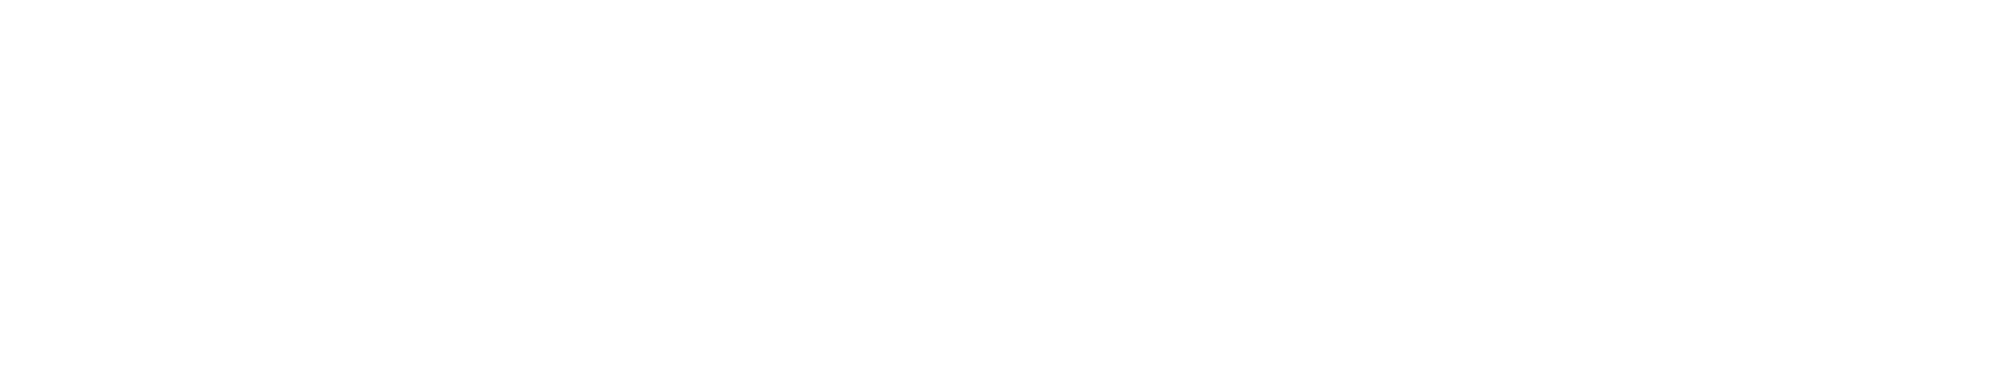 Prank updated you have. Windows 10 logo png